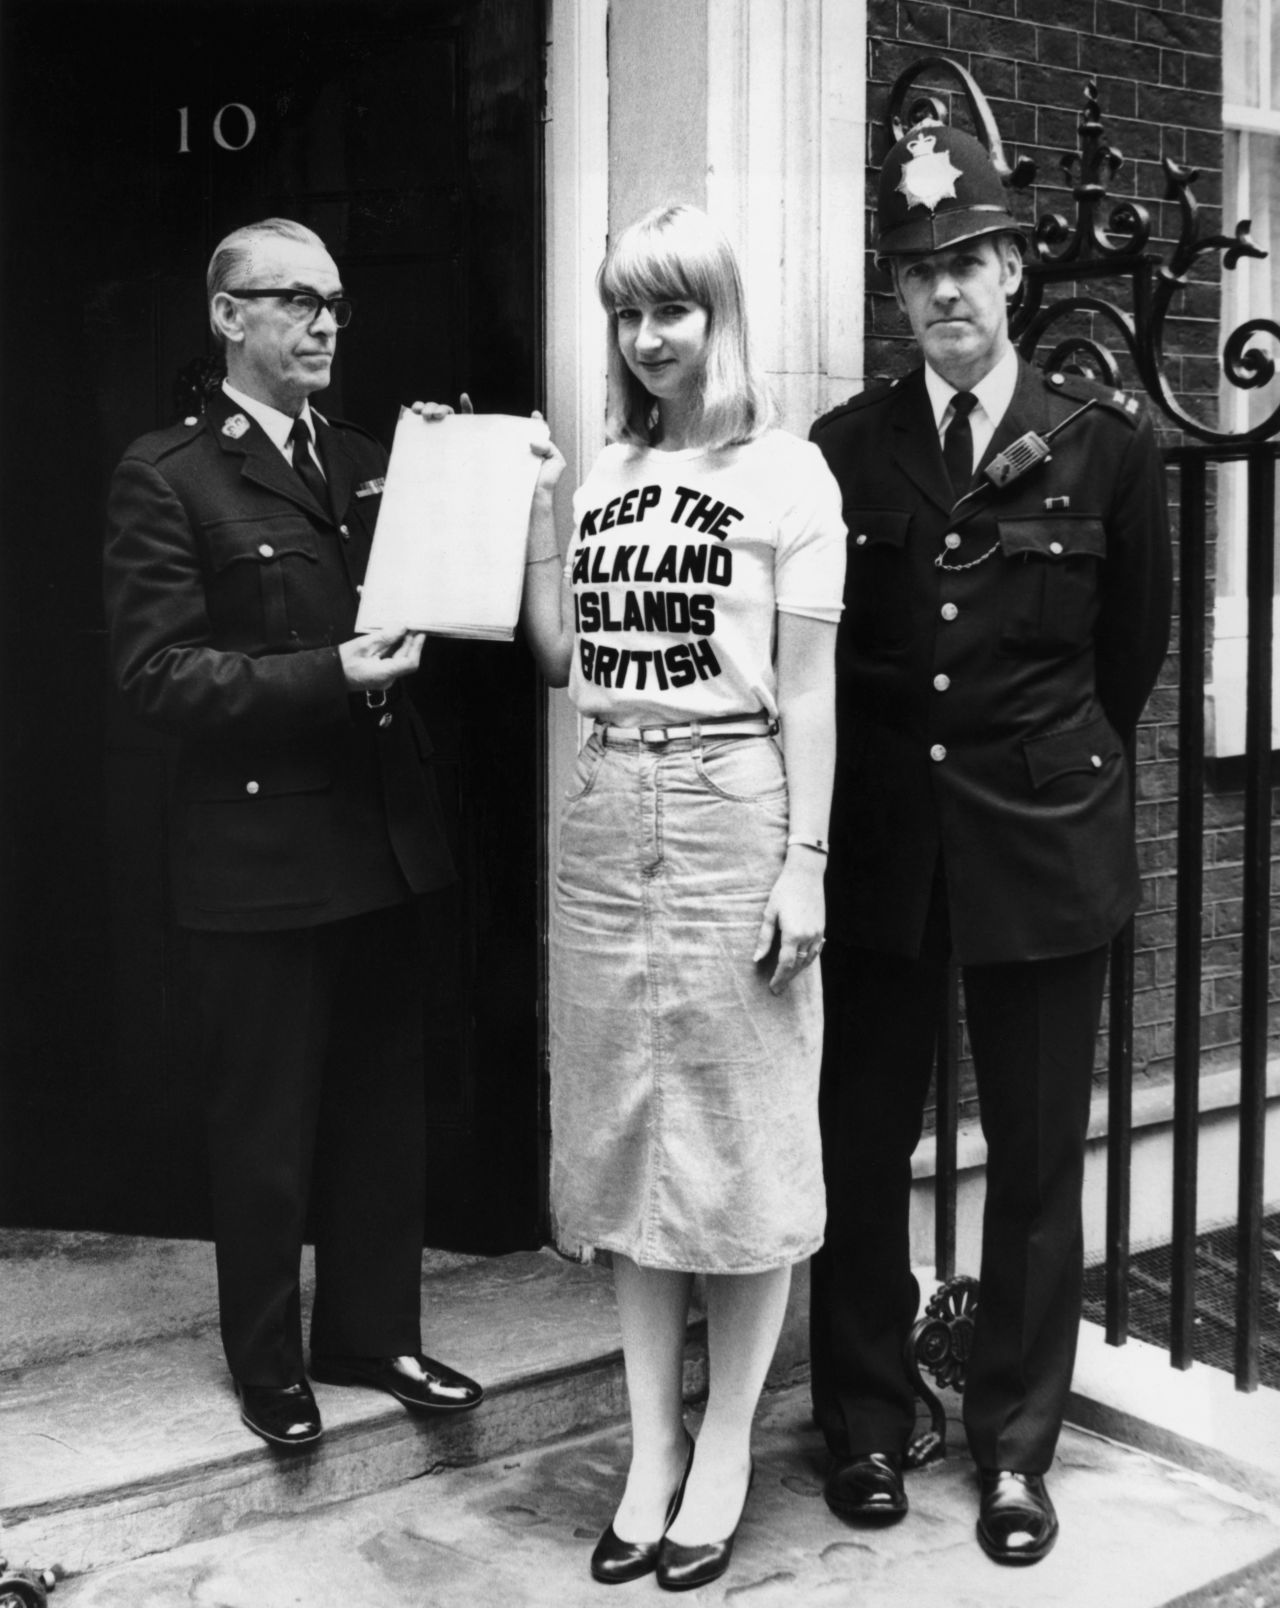 Sukey Cameron hands in a petition at Downing Street demanding full British citizenship to 300 Falkland islanders whose grandparents were not born in Britain, 25th September 1981.